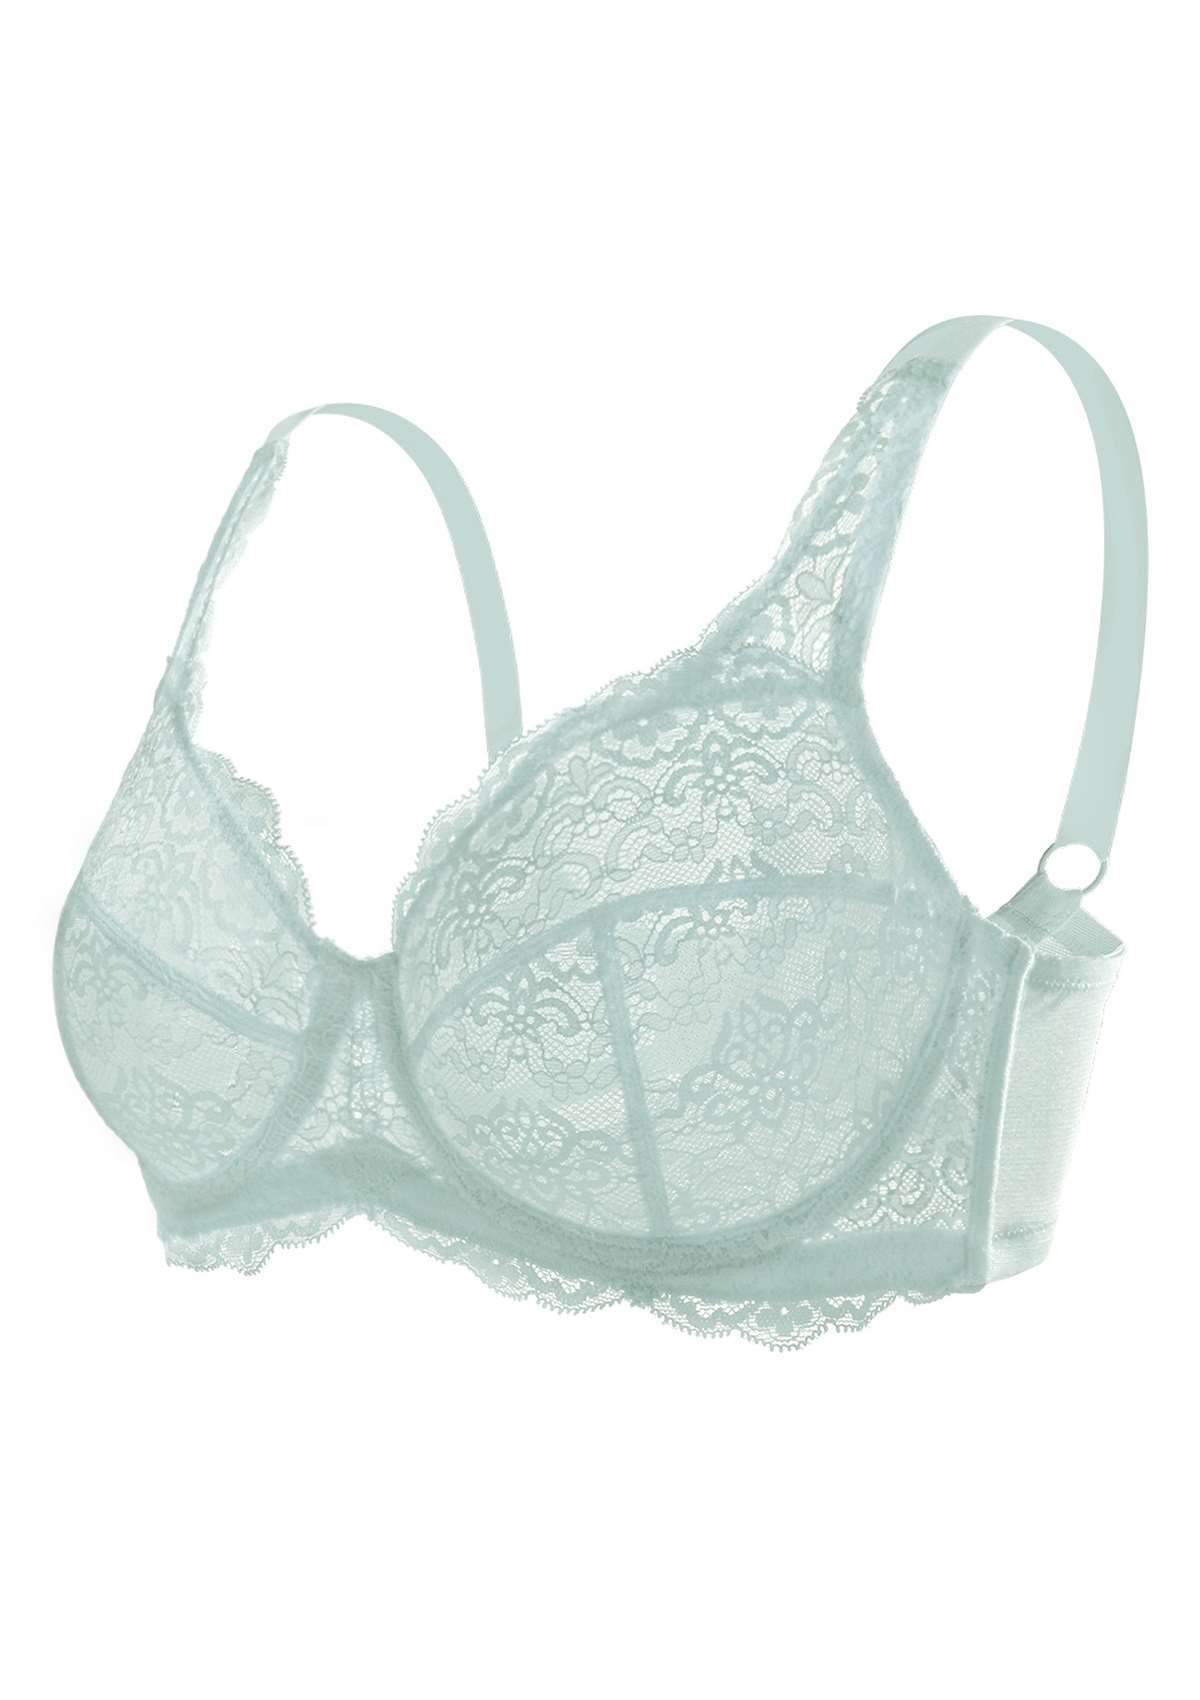 HSIA All-Over Floral Lace: Best Bra For Elderly With Sagging Breasts - Crystal Blue / 40 / D